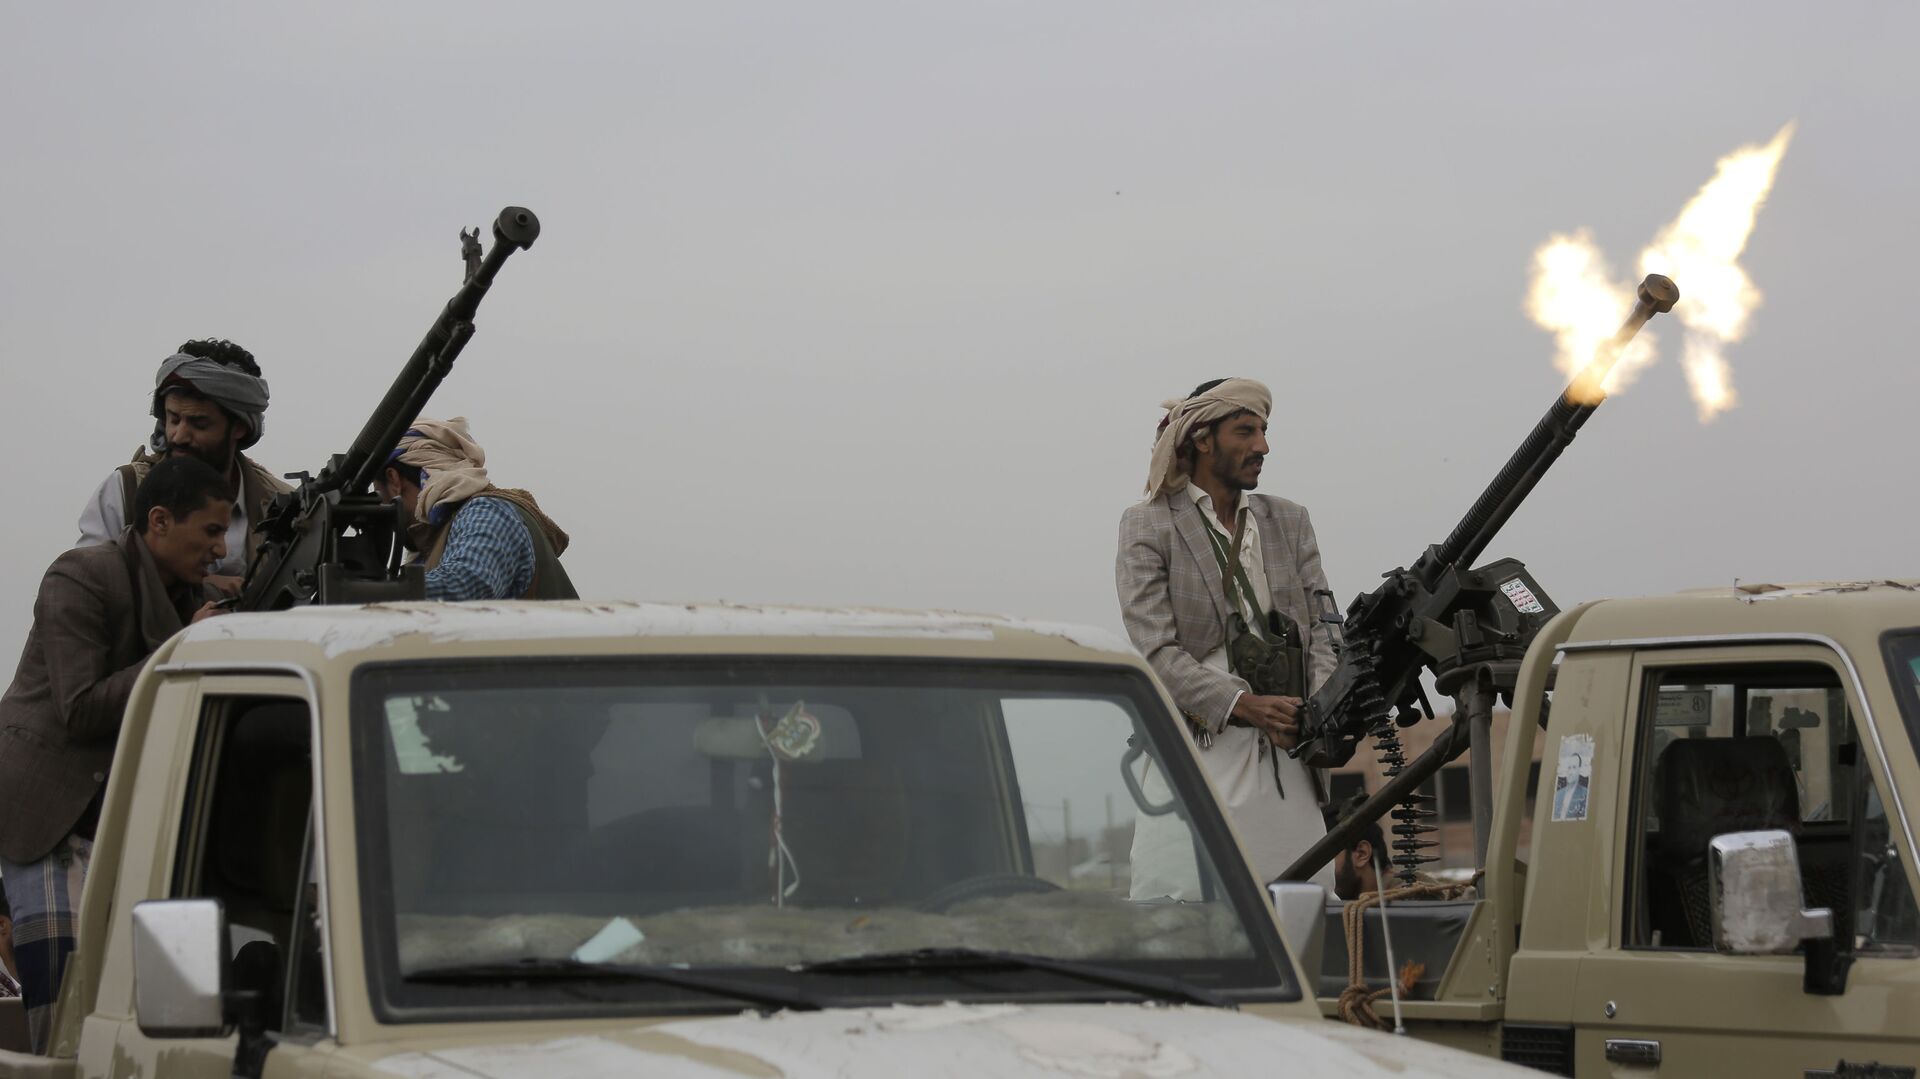 A Houthi rebel fighter fires in the air during a gathering aimed at mobilizing more fighters for the Houthi movement, in Sanaa, Yemen - Sputnik International, 1920, 22.10.2022